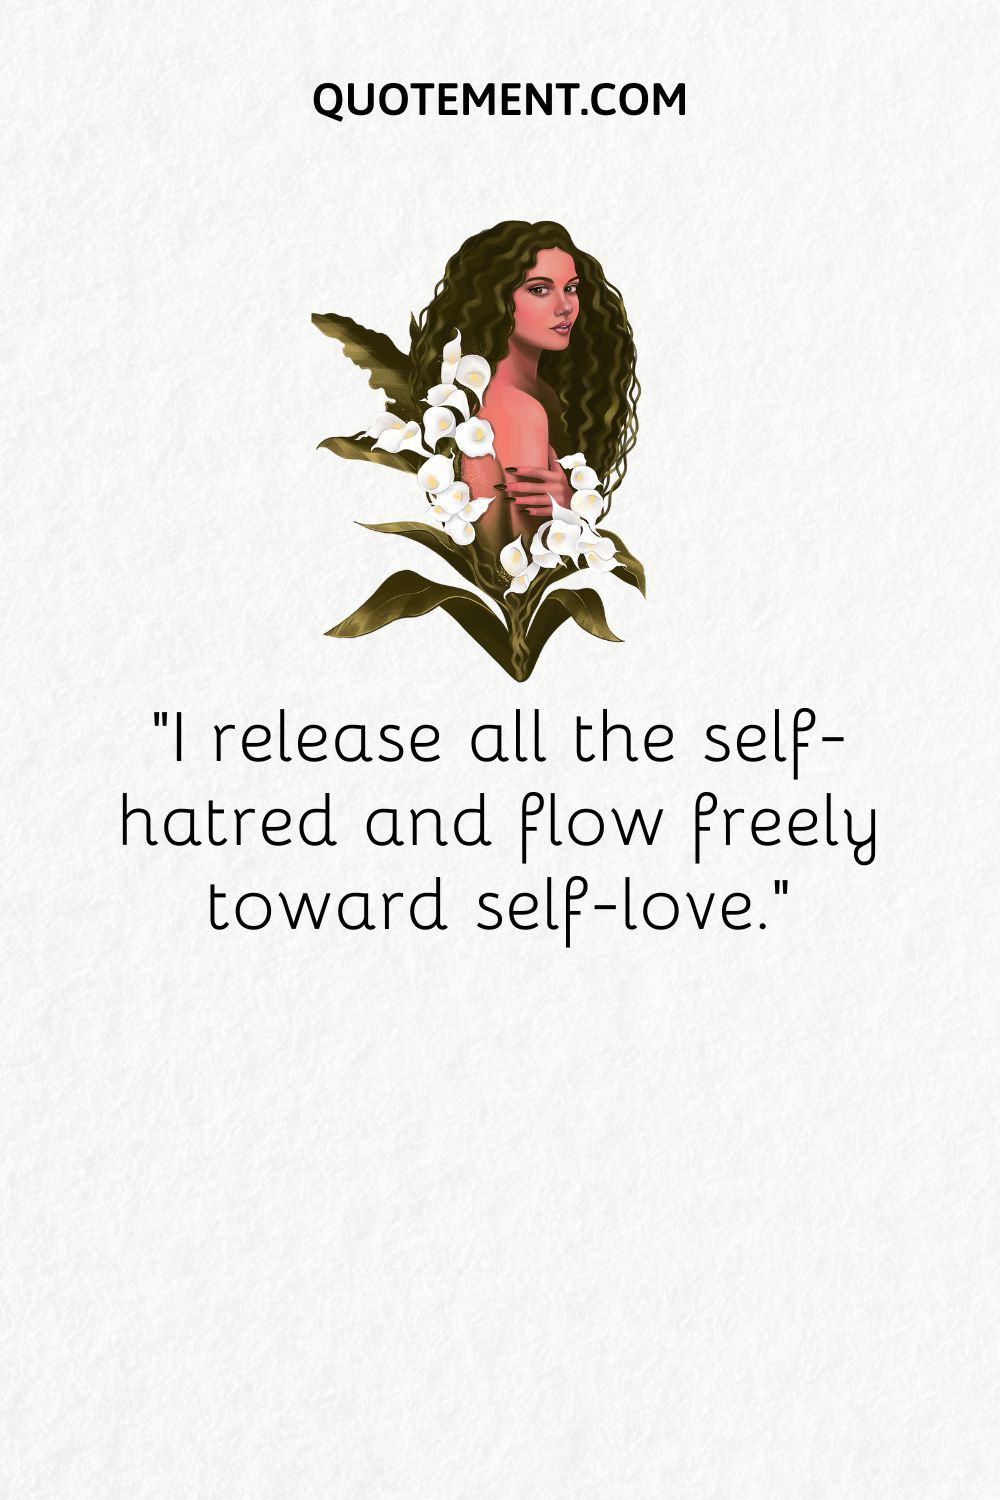 I release all the self-hatred and flow freely toward self-love